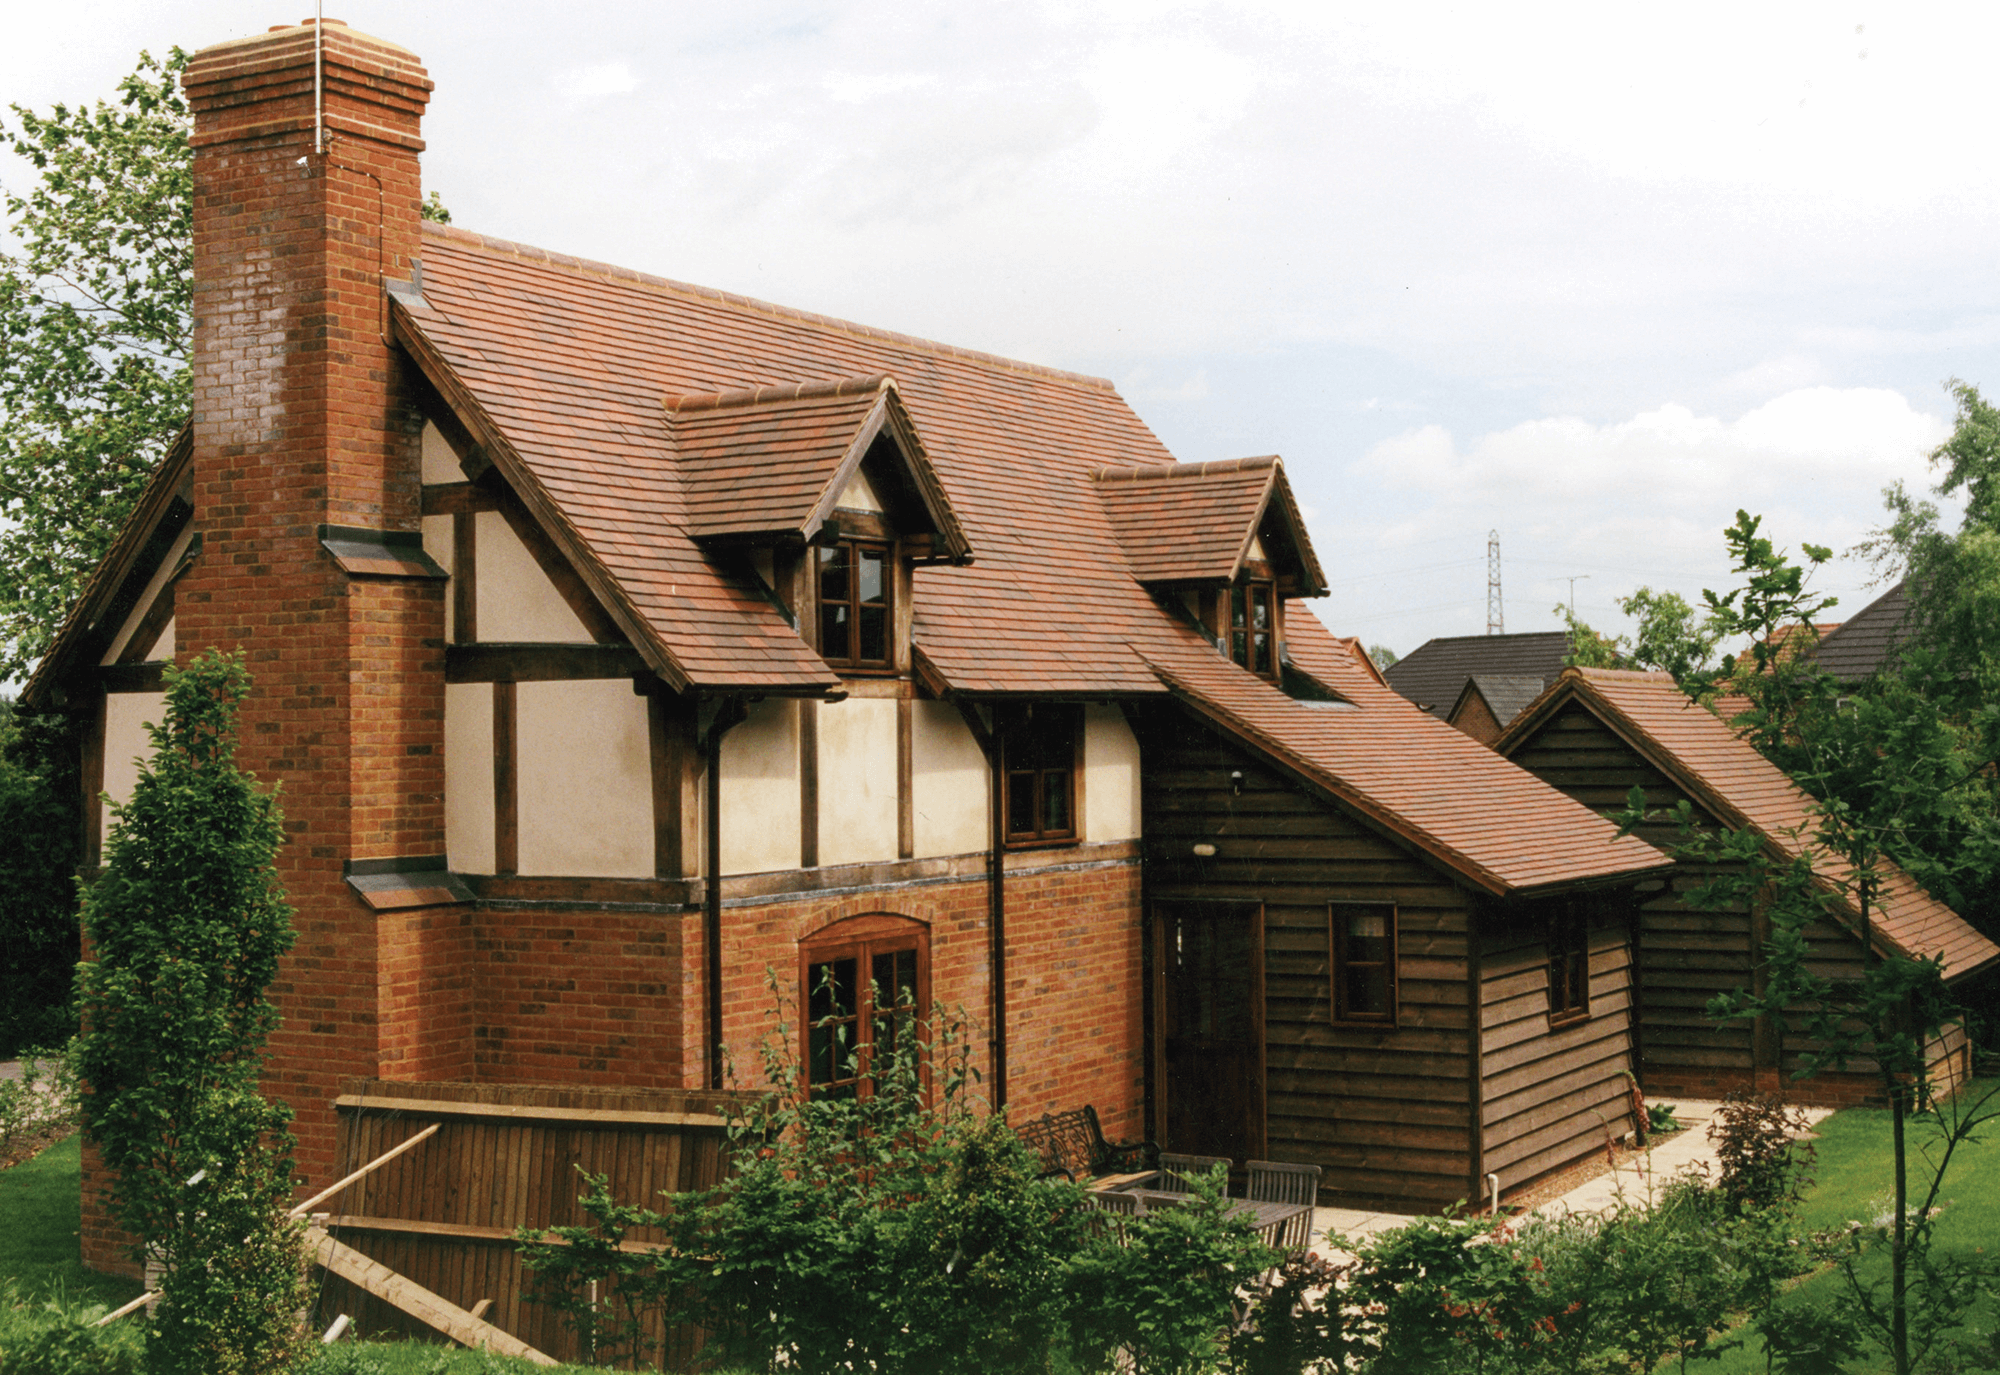 Dreadnought clay roof tiles